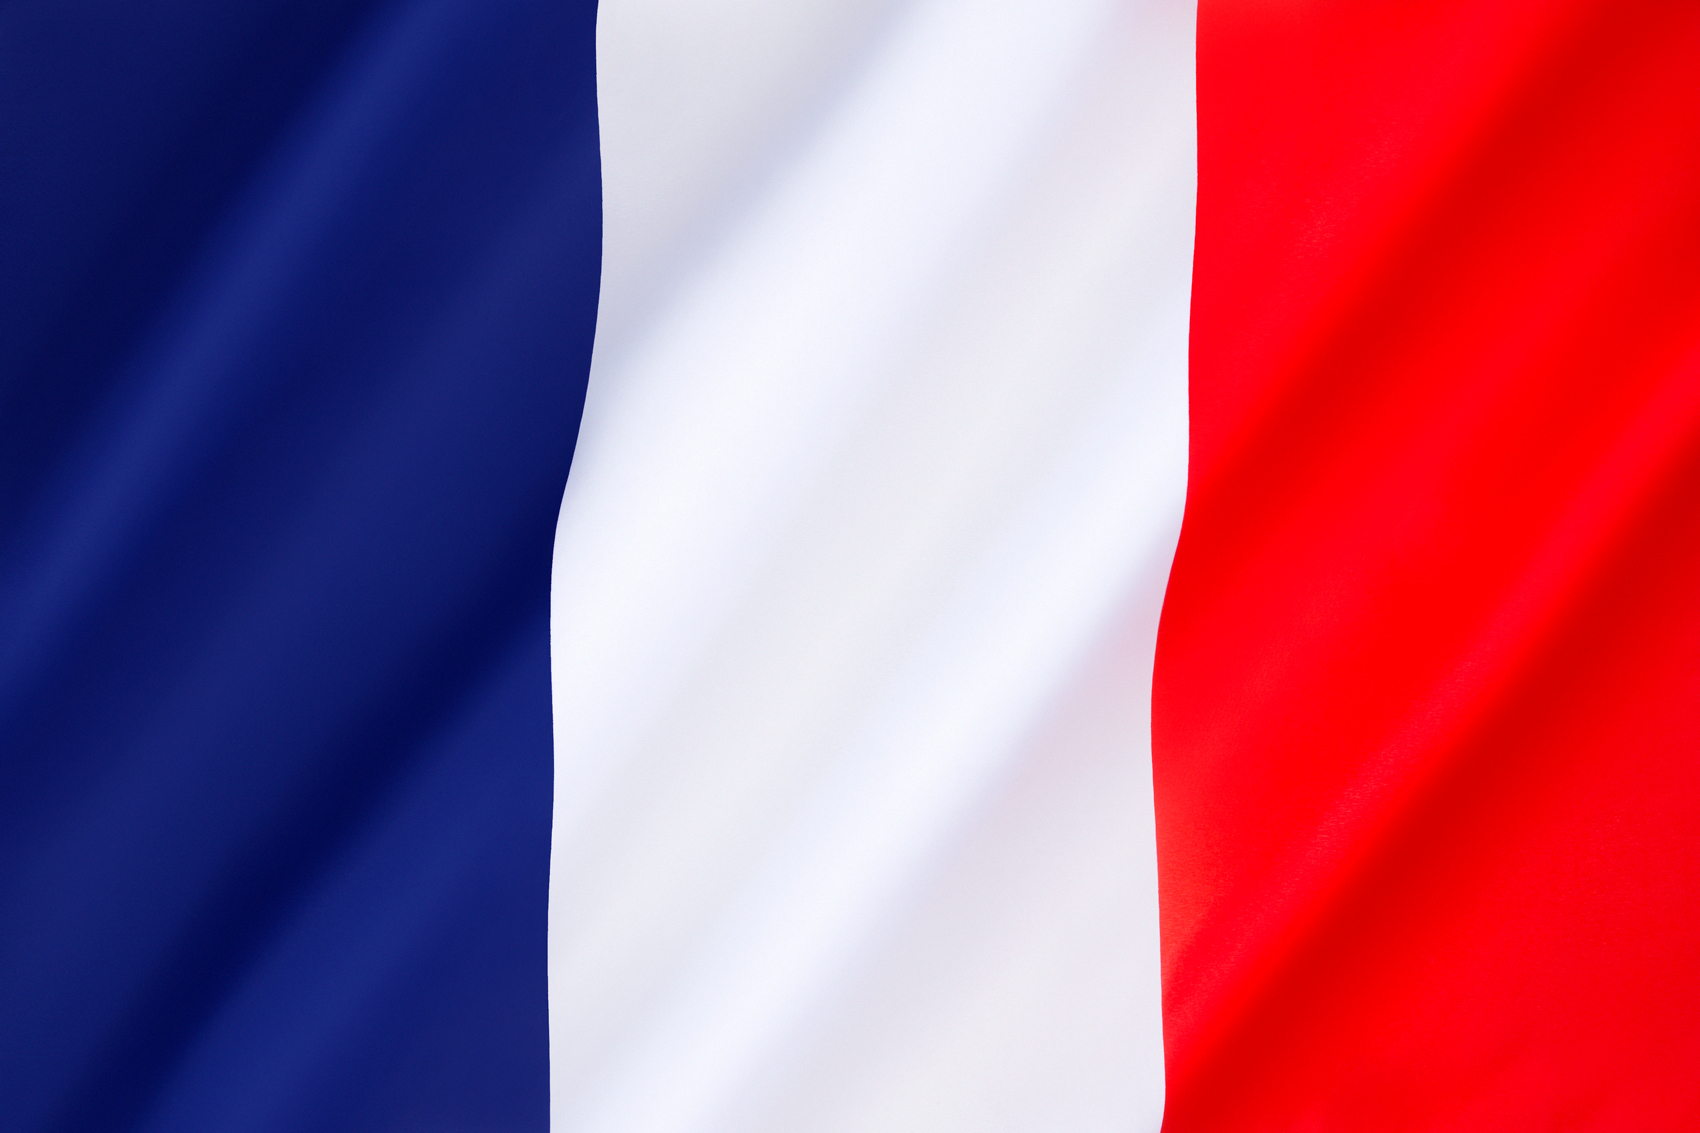 National Symbols of the French Fifth Republic - French Flag. Photo by SteveAllenPhoto999 via Envato Elements